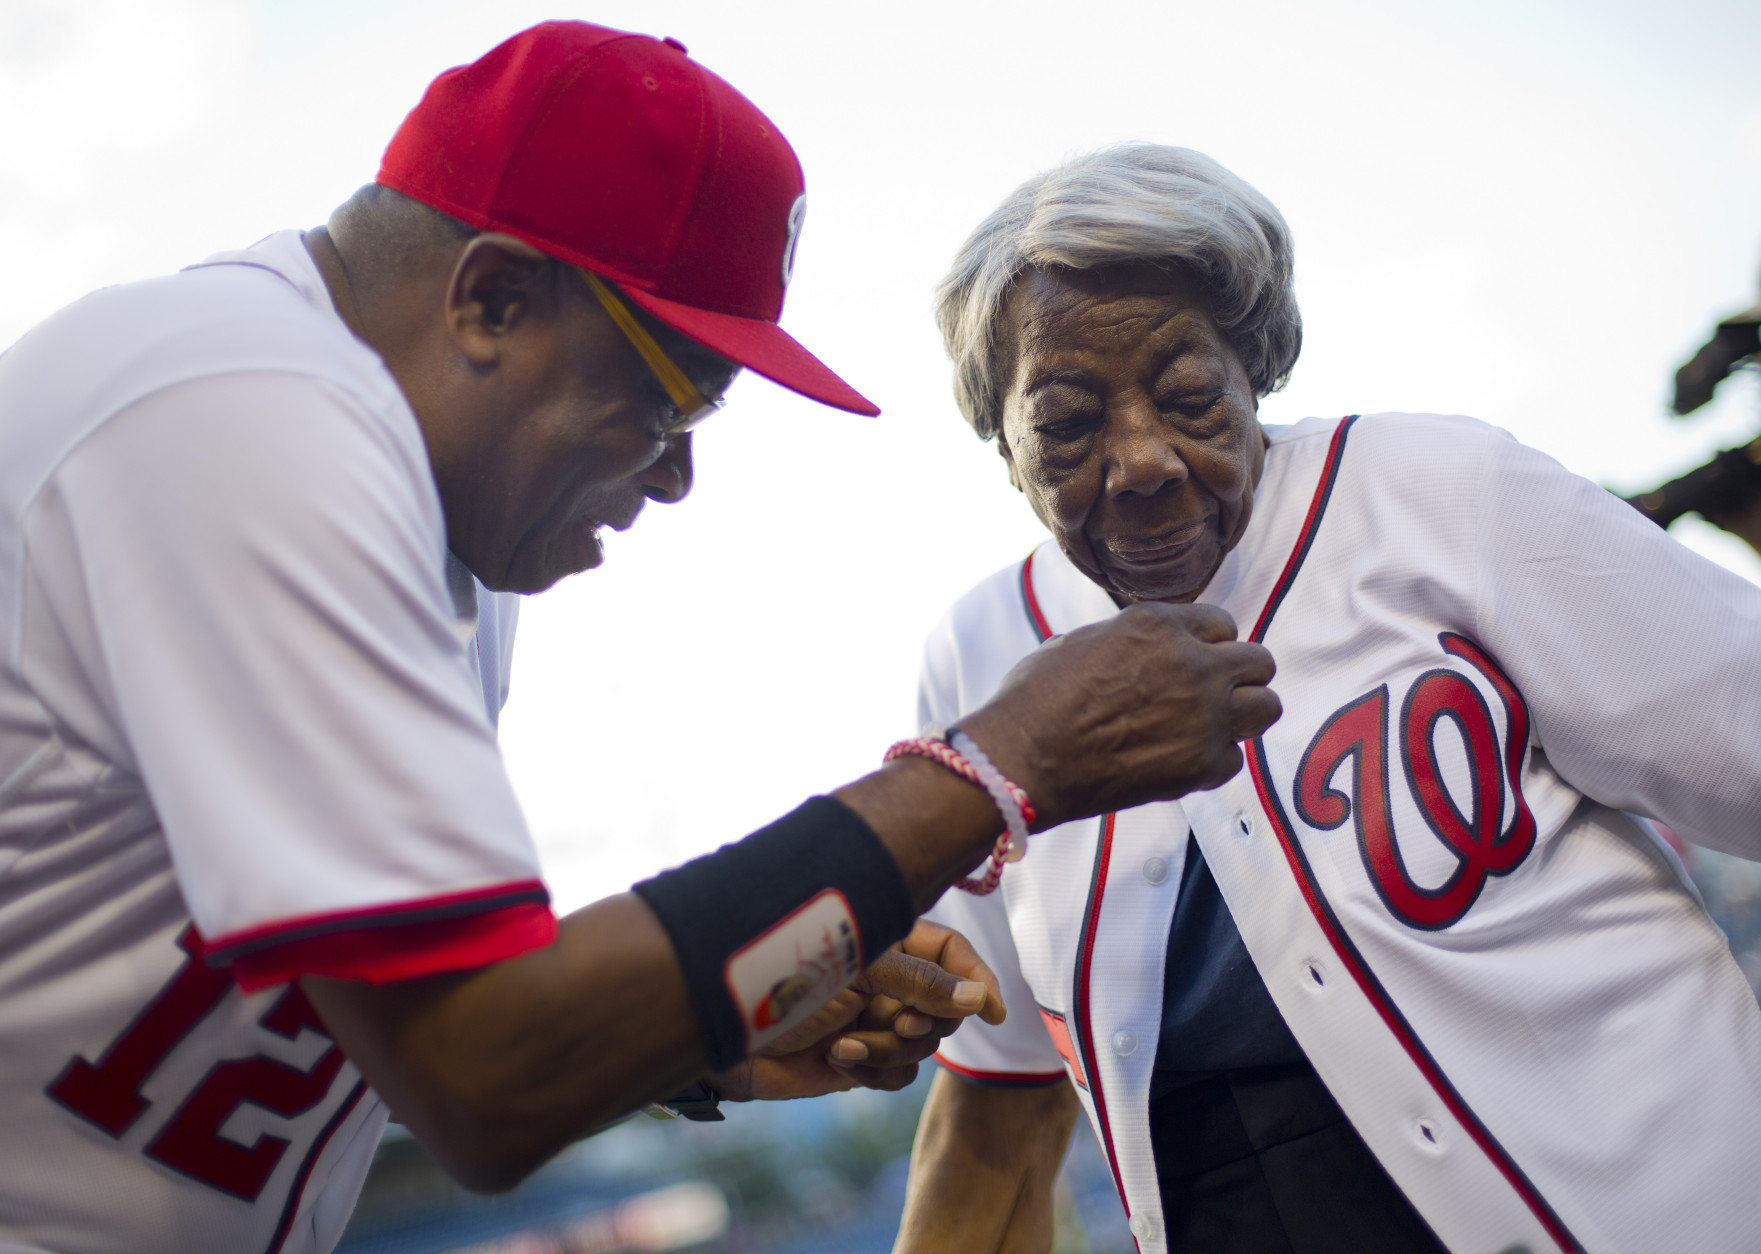 Washington Nationals manager Dusty Baker helps Virginia McLaurin, 107, with her jersey on the field before the Nationals' baseball game against the St. Louis Cardinals at Nationals Park, Thursday, May 26, 2016, in Washington. McLaurin gained Internet fame for her impromptu dance with President Barack Obama in February during a Black History Month reception at the White House and said afterward that she could finally die happy. (AP Photo/Pablo Martinez Monsivais)